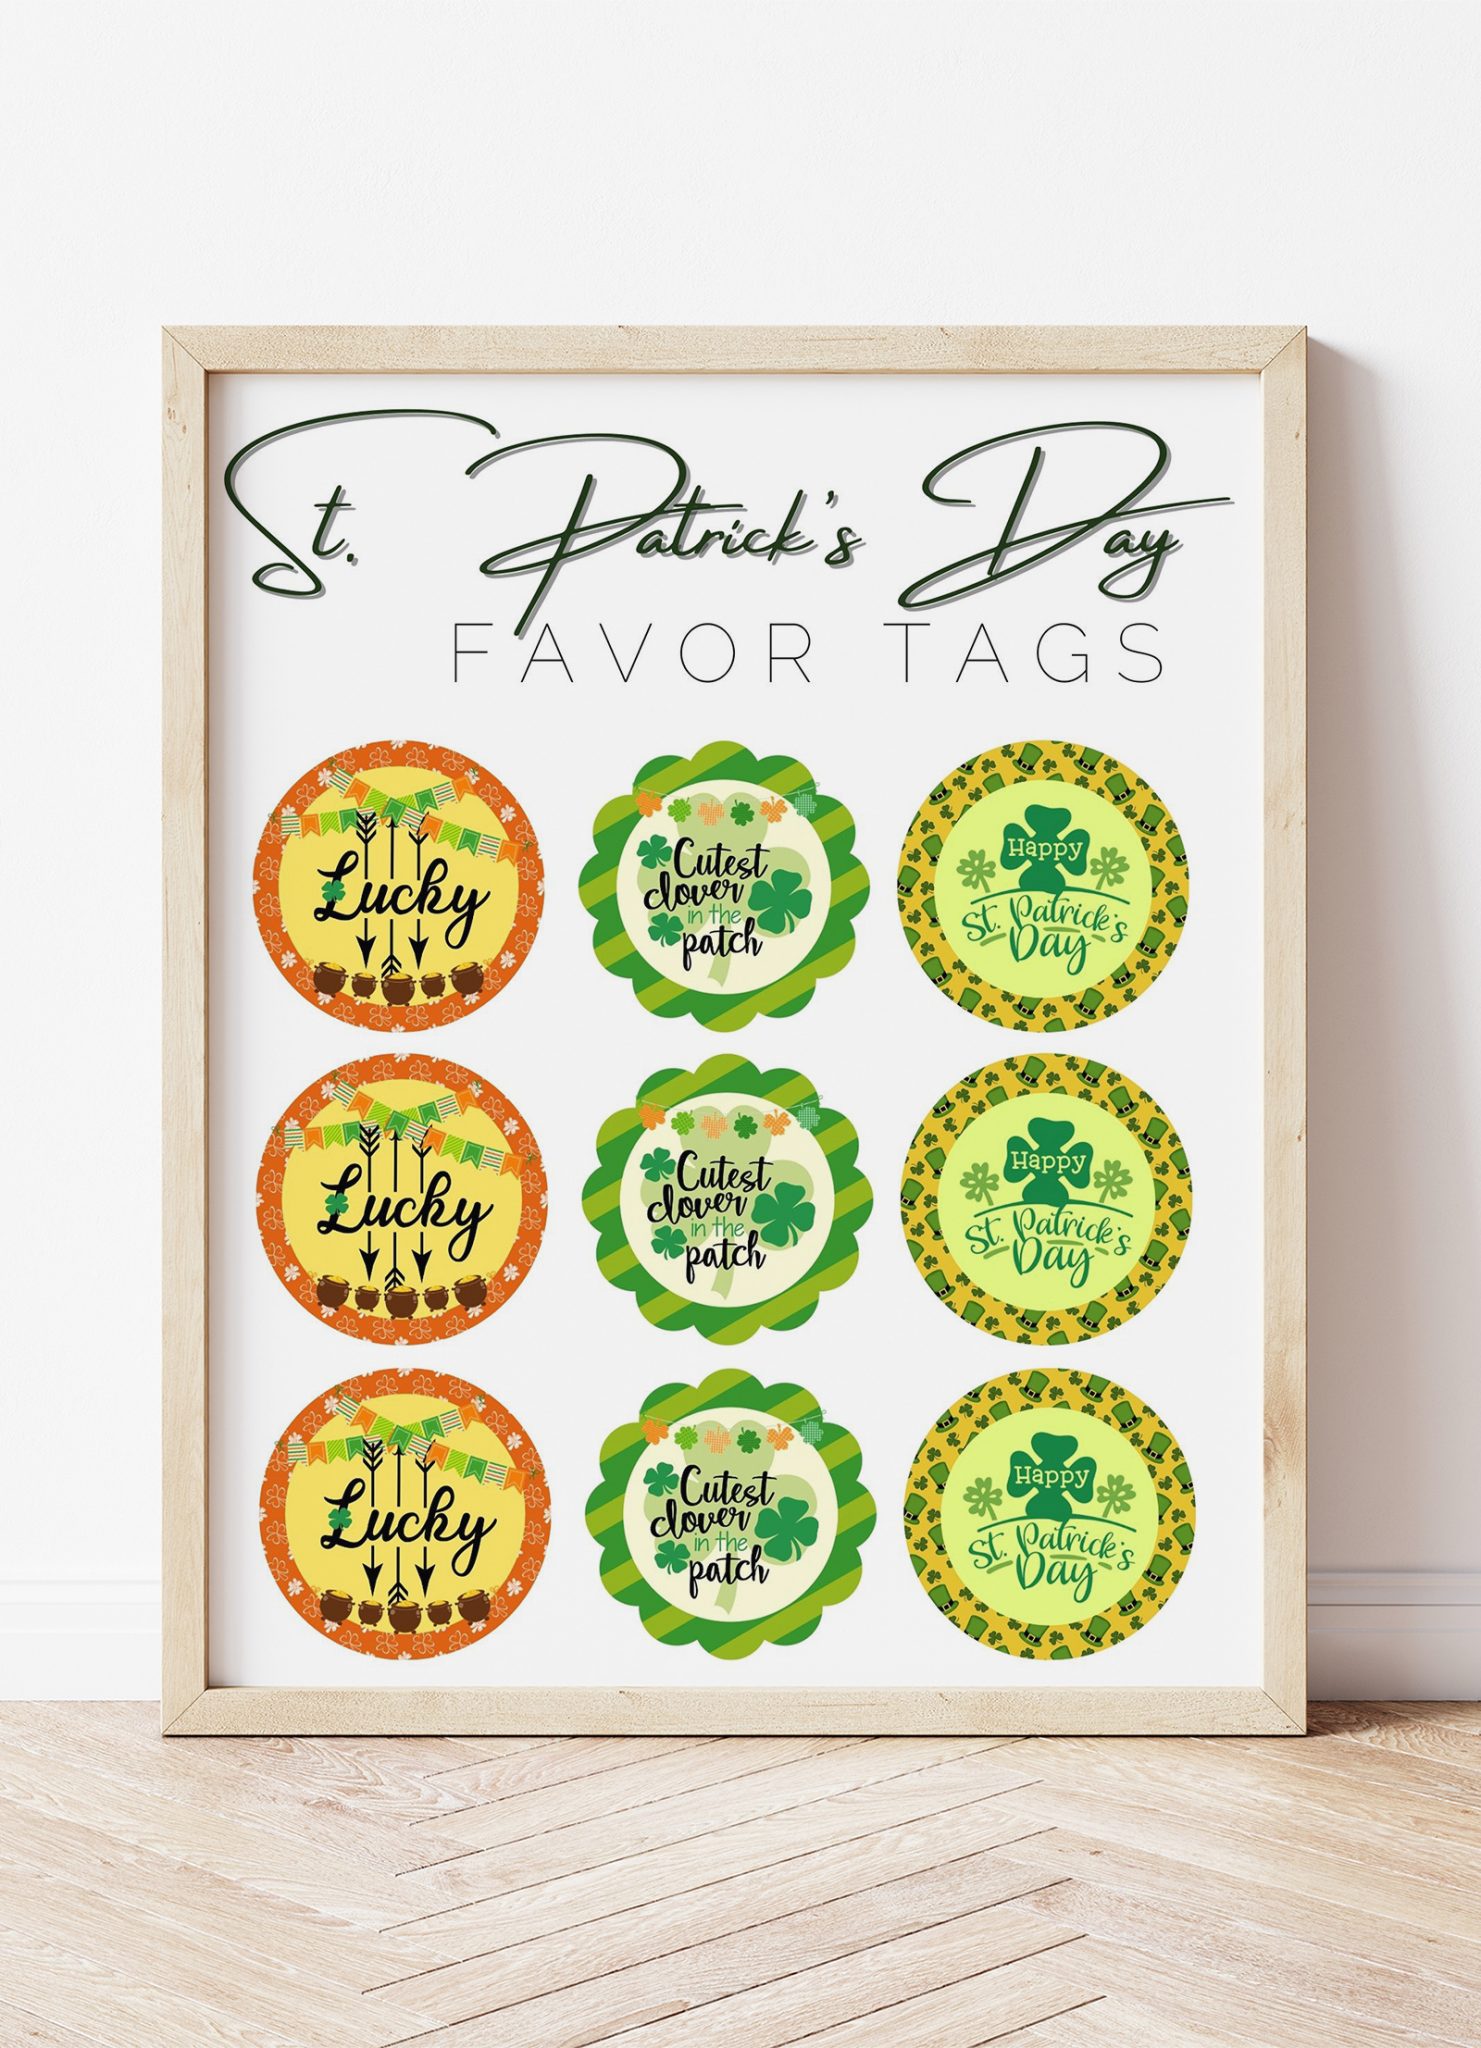 9 free printable St. Patrick's Day Favor Tags